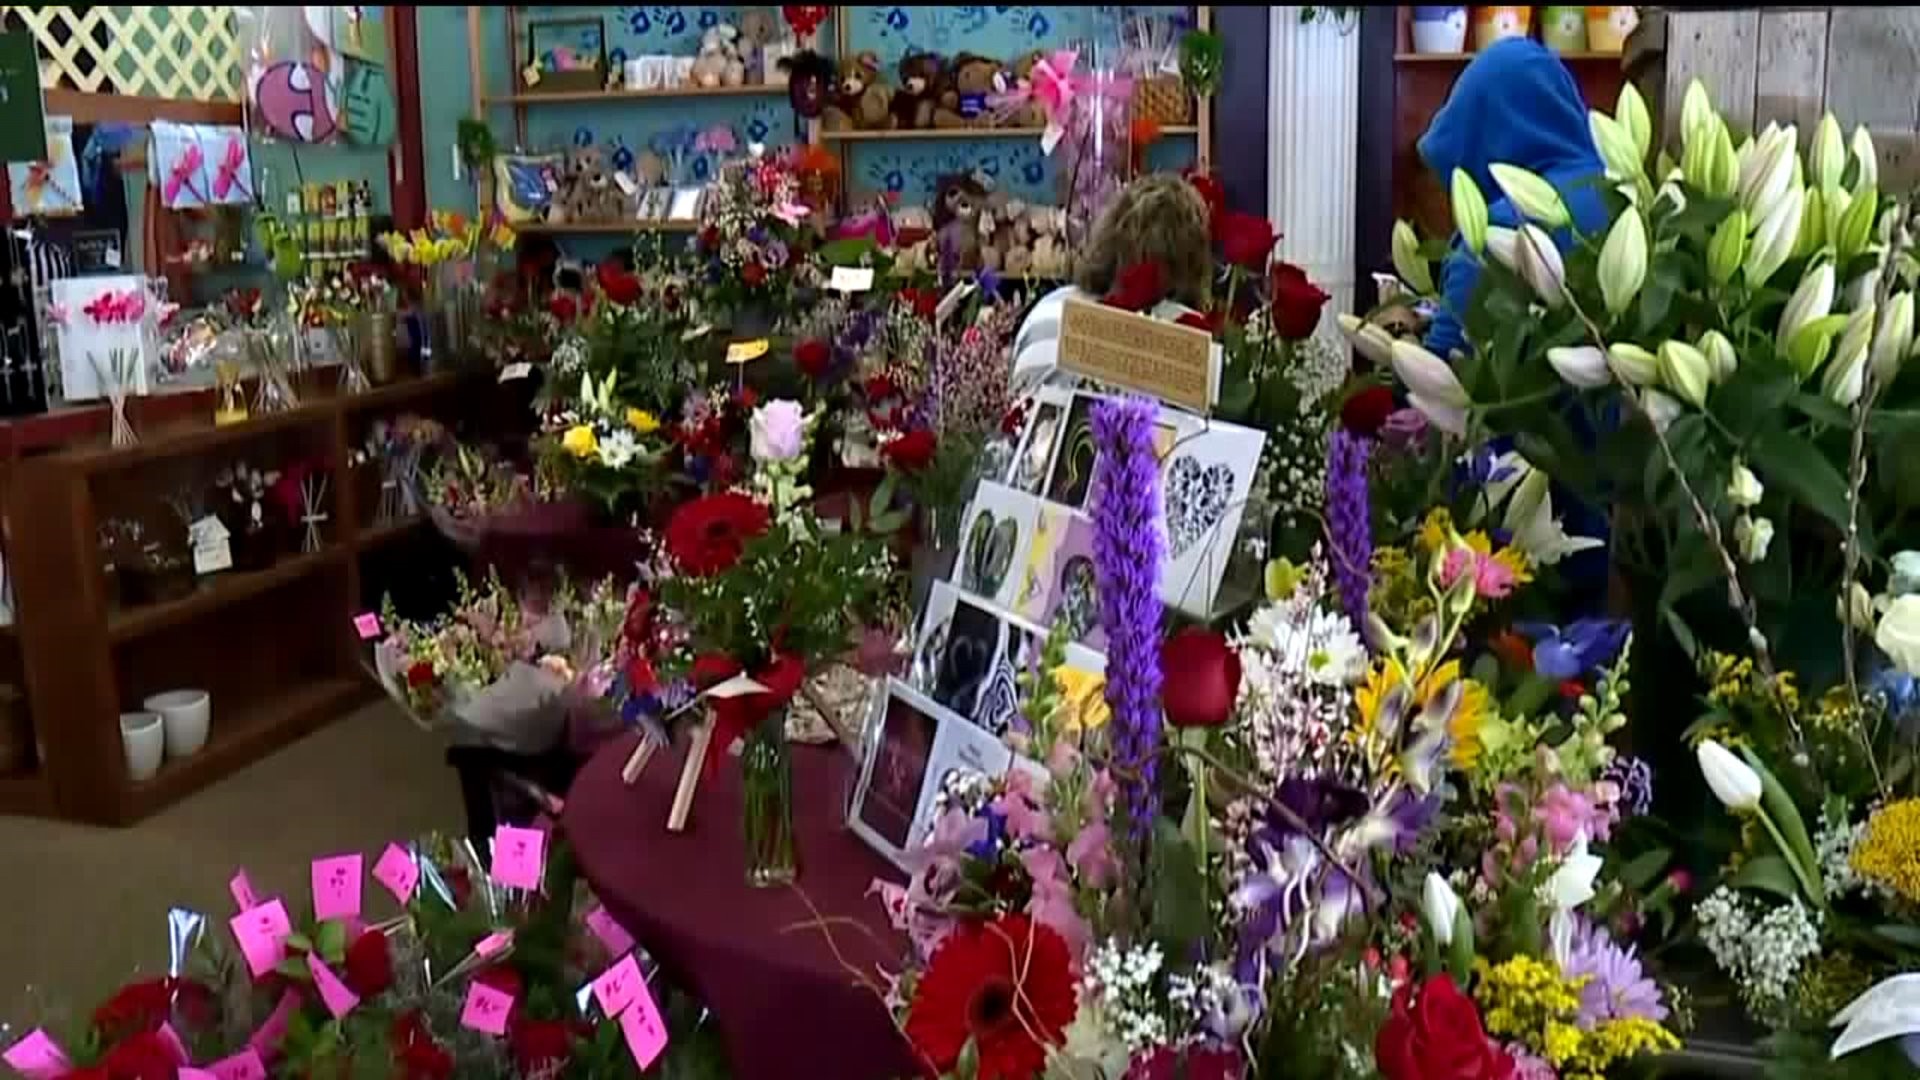 Flower Shops Busy Ahead of Valentine's Day